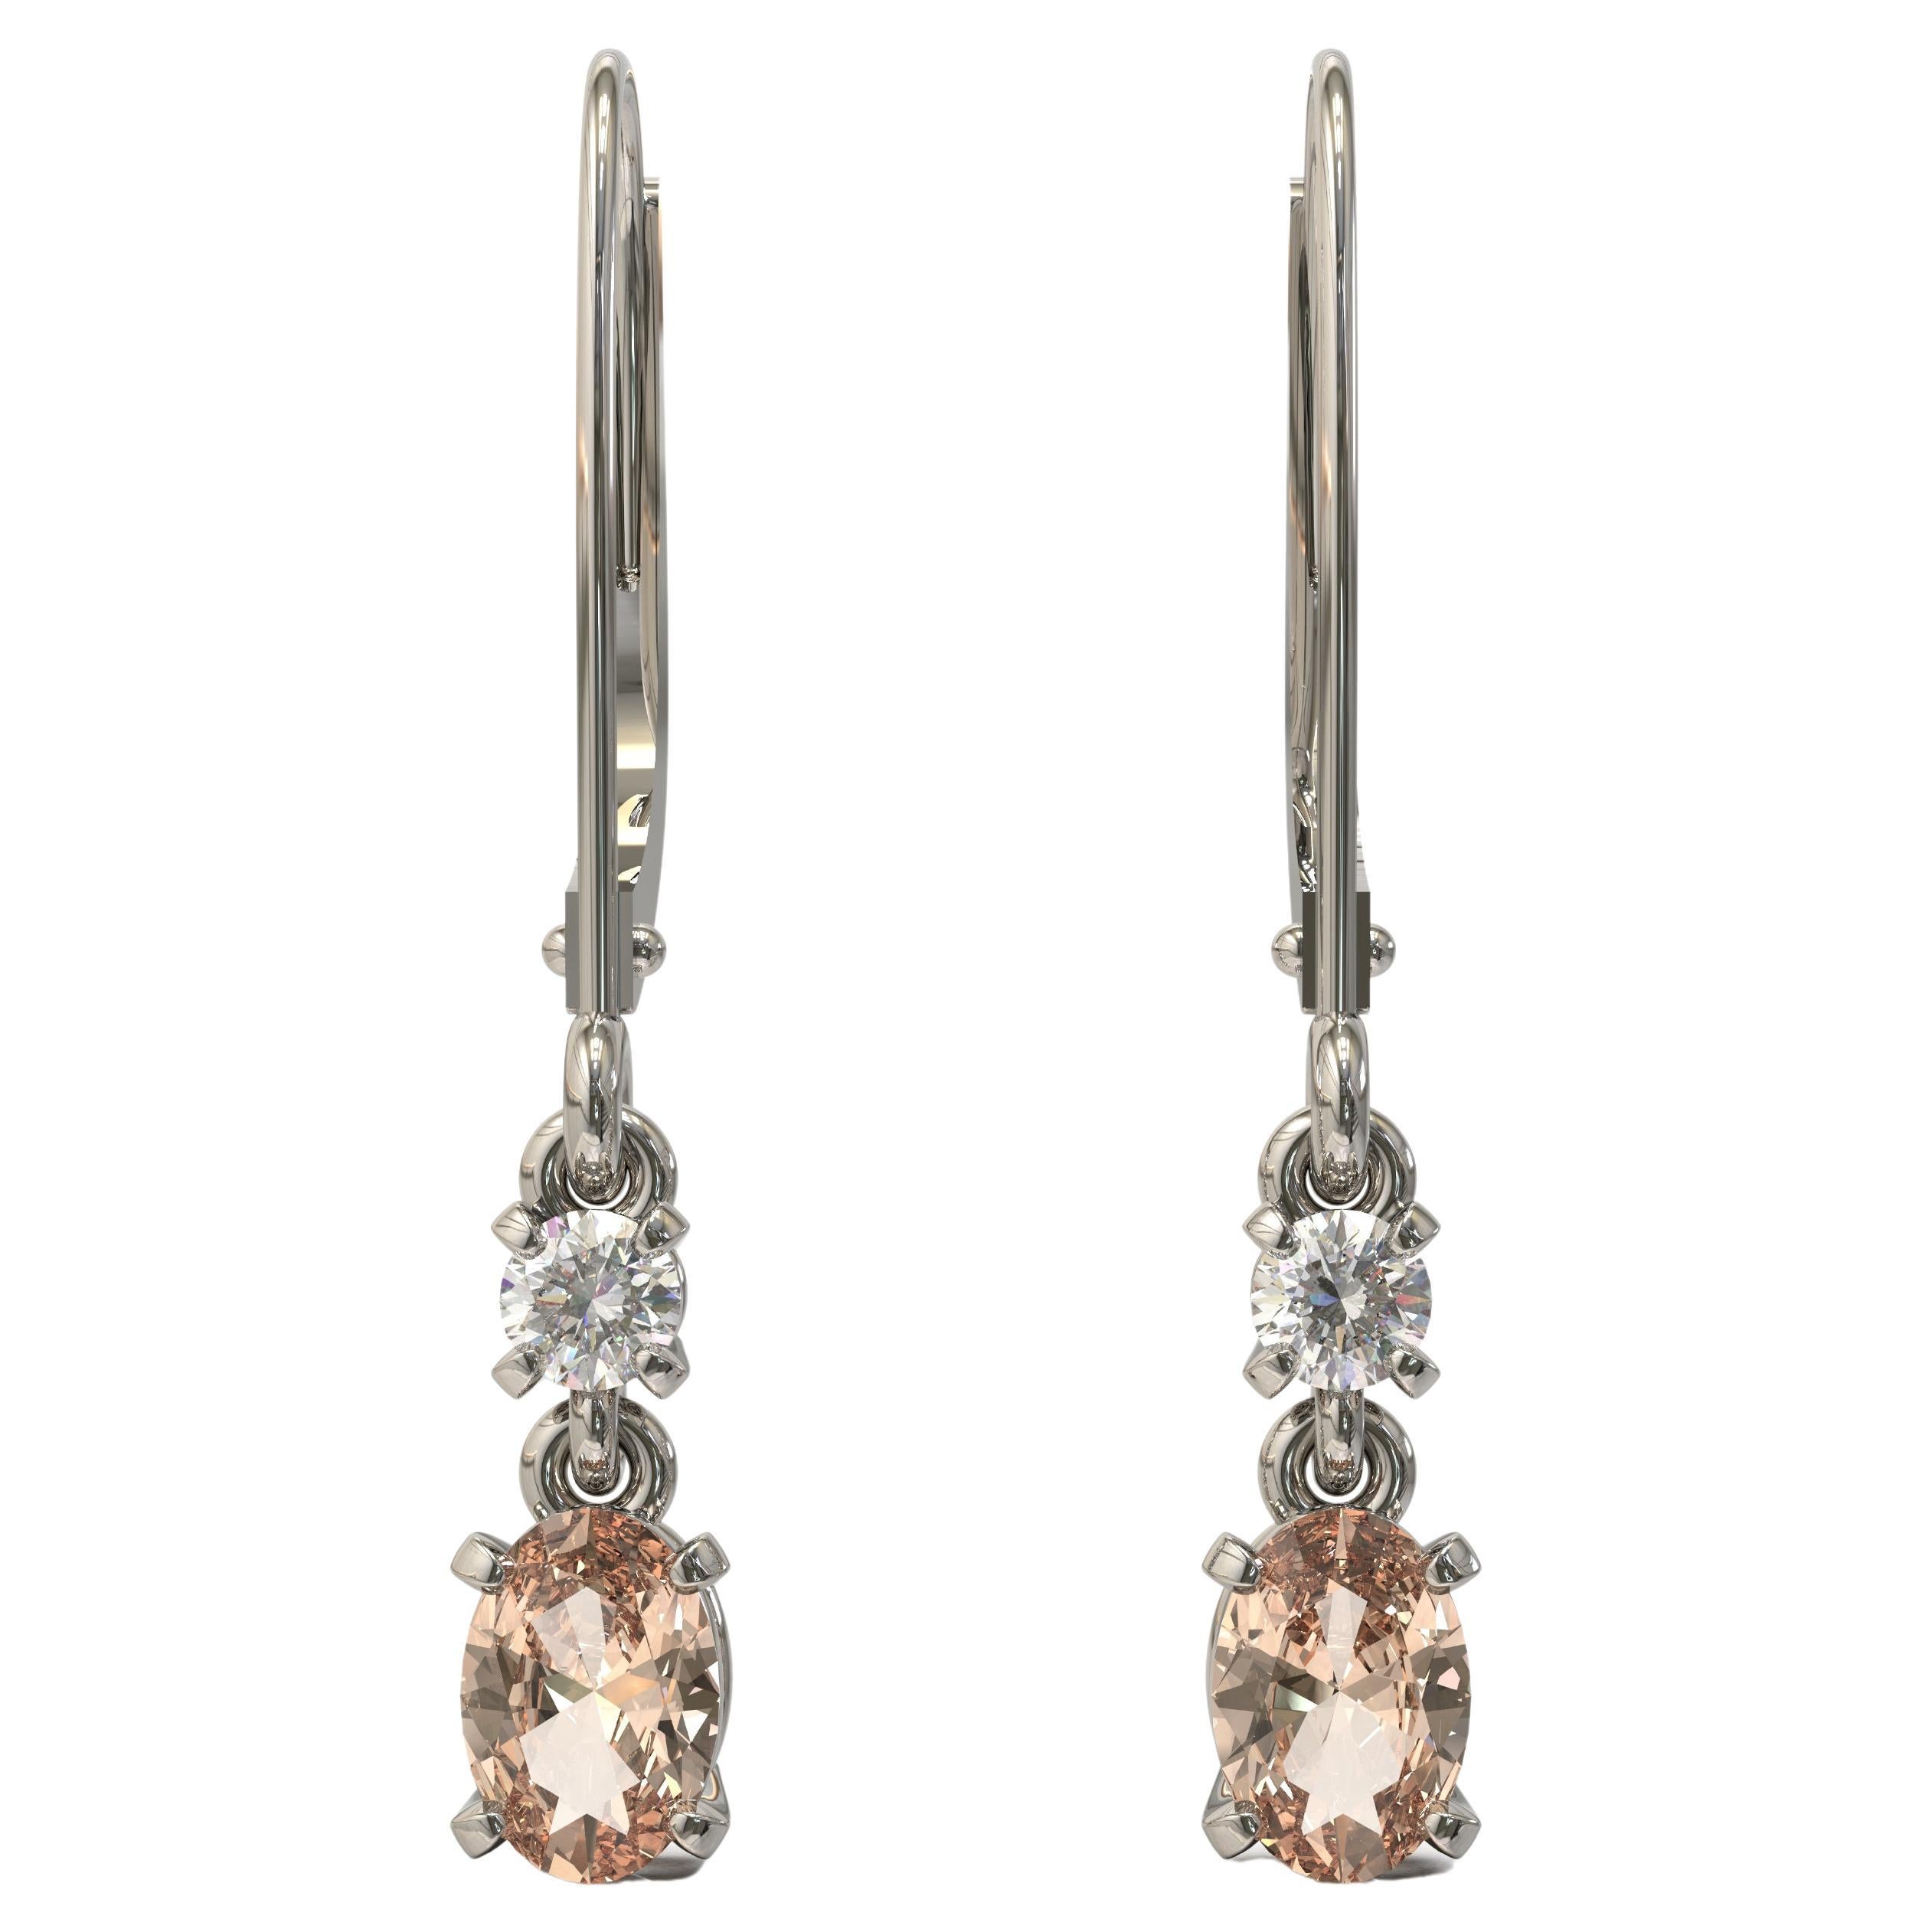  Oval Morganite Round Diamond Earrings in 18 Carat White Gold By Kian Design For Sale